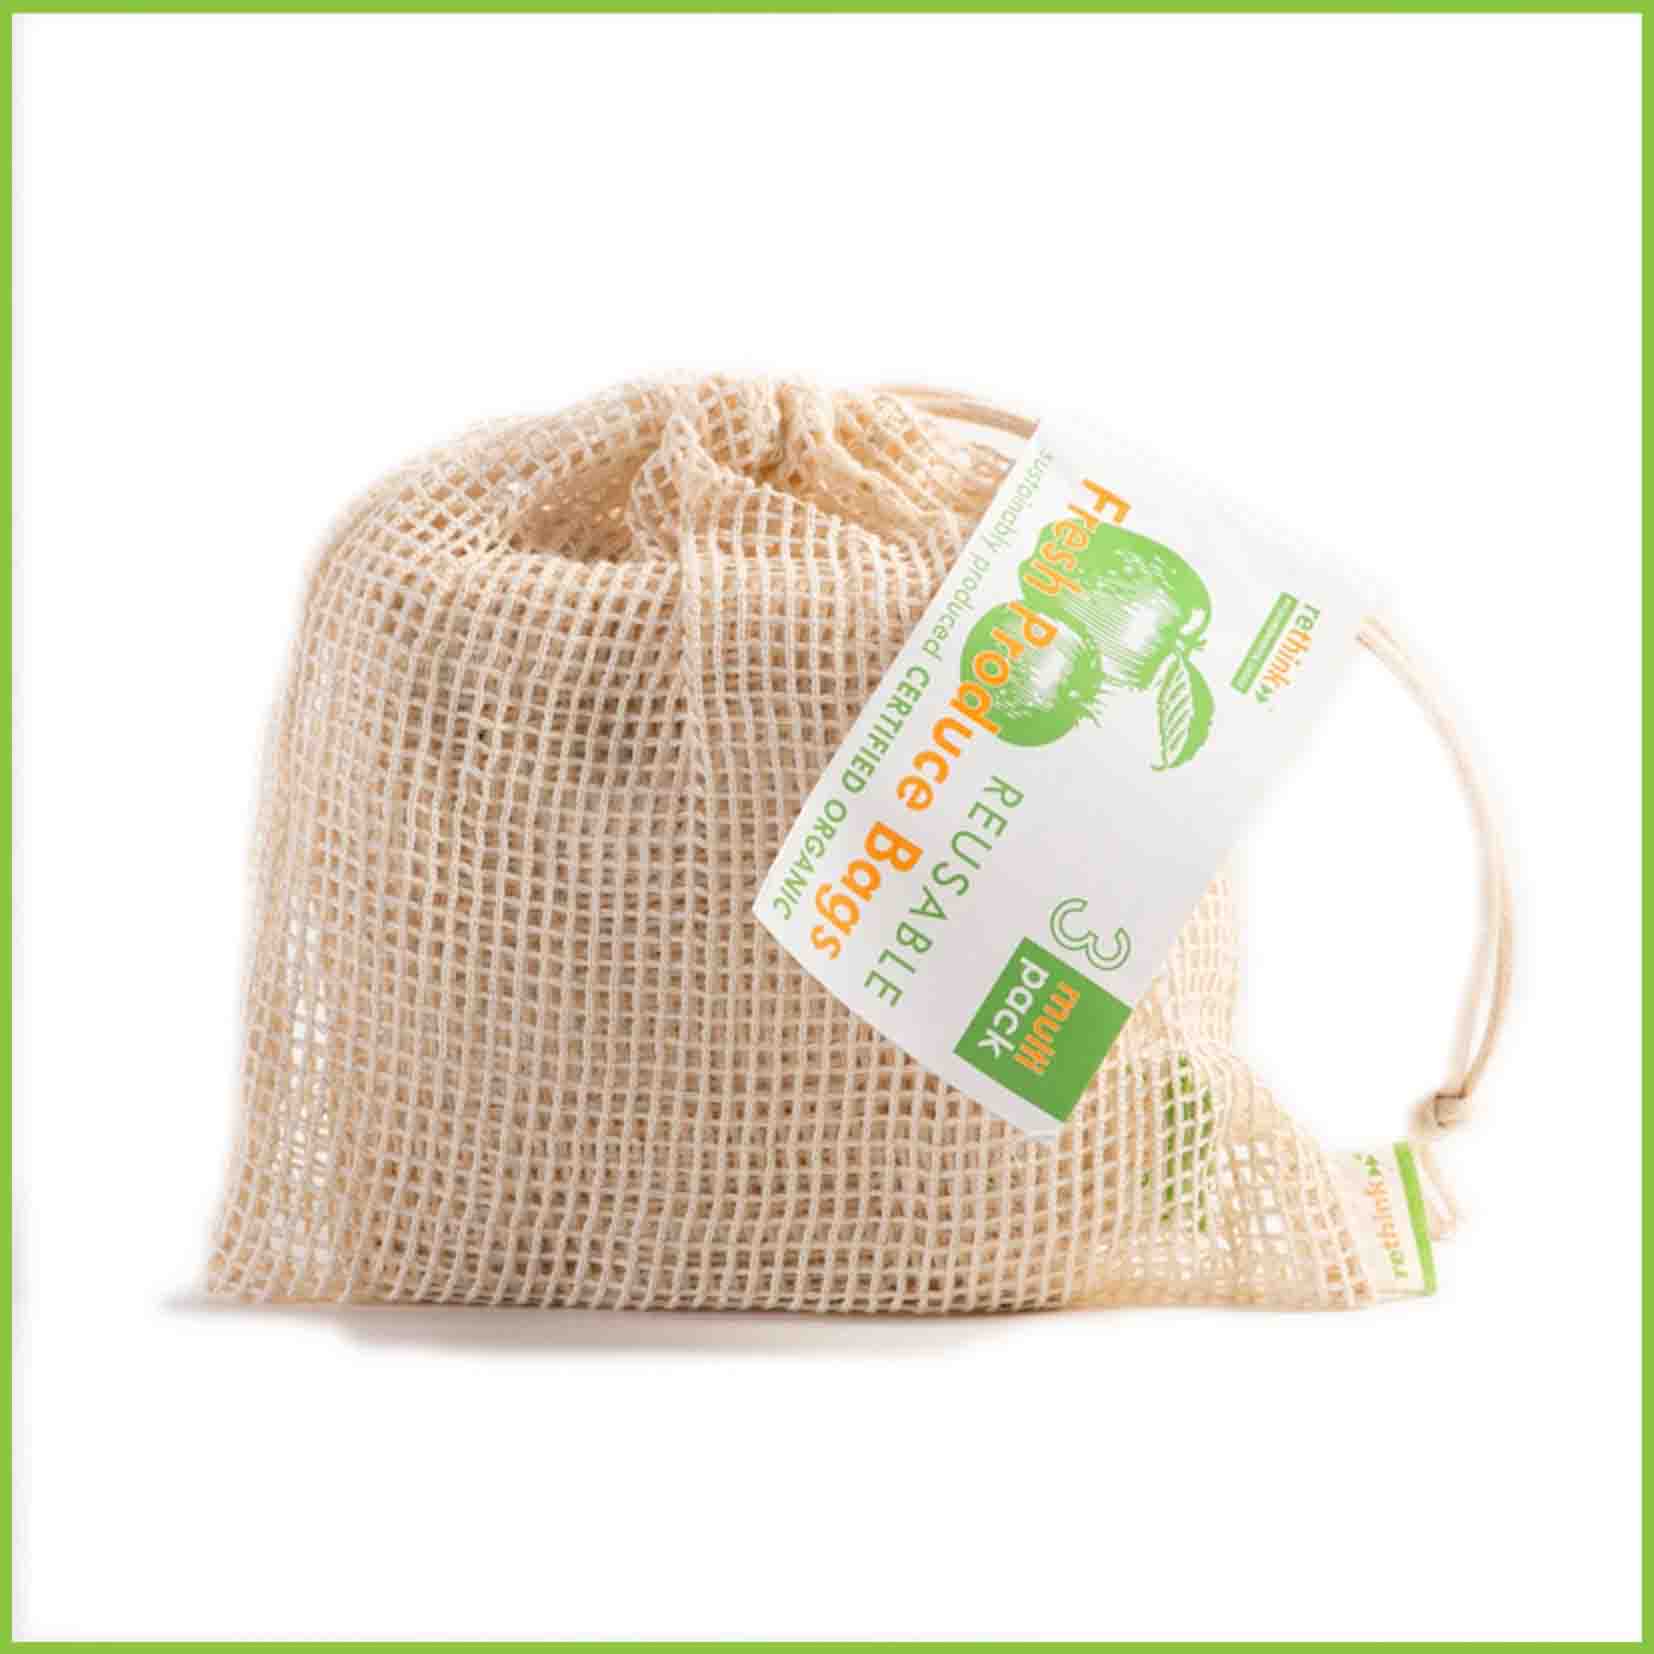 A multi pack of reusable veggie bags from Rethink.